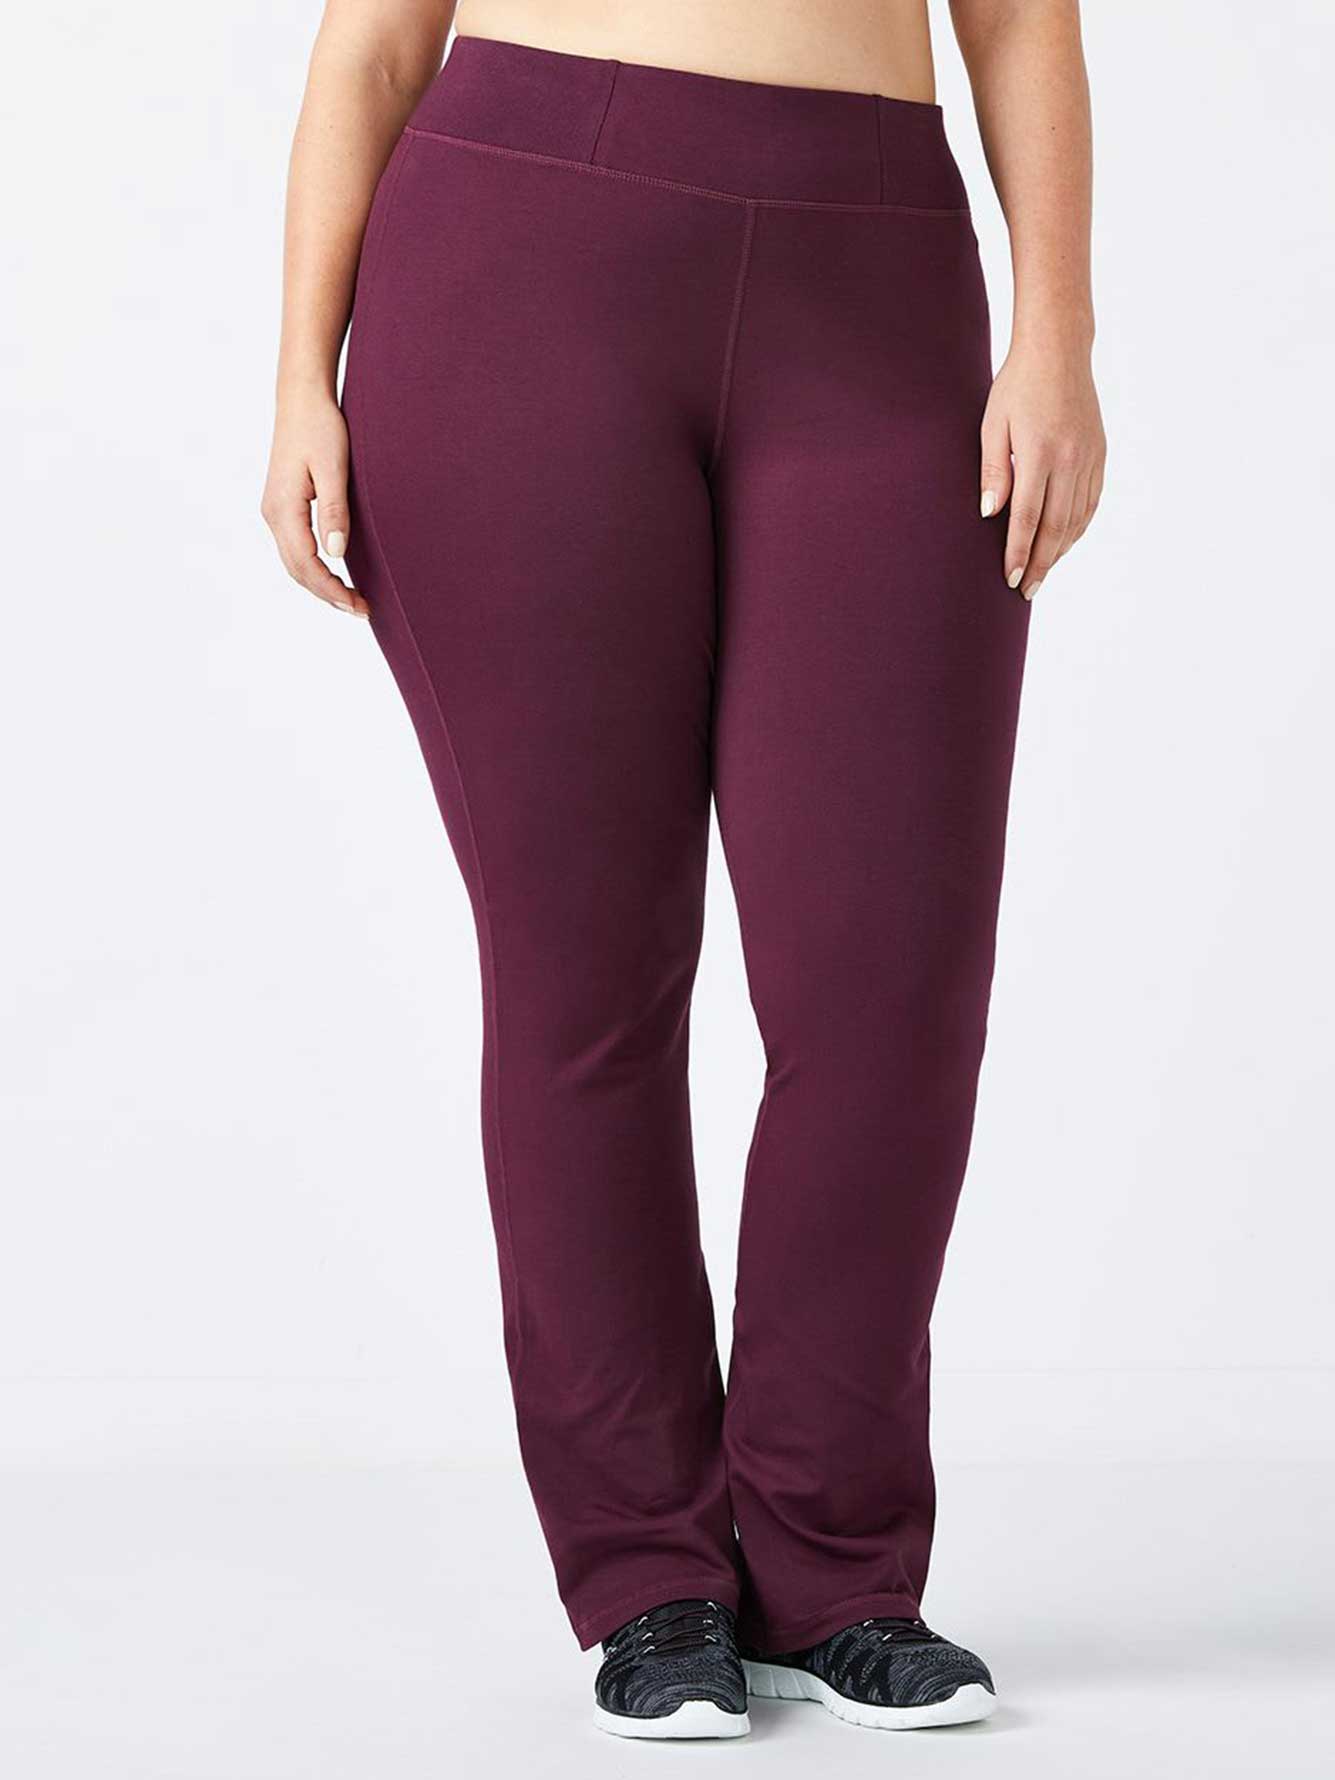 Petite Plus Size Yoga Pants  International Society of Precision Agriculture